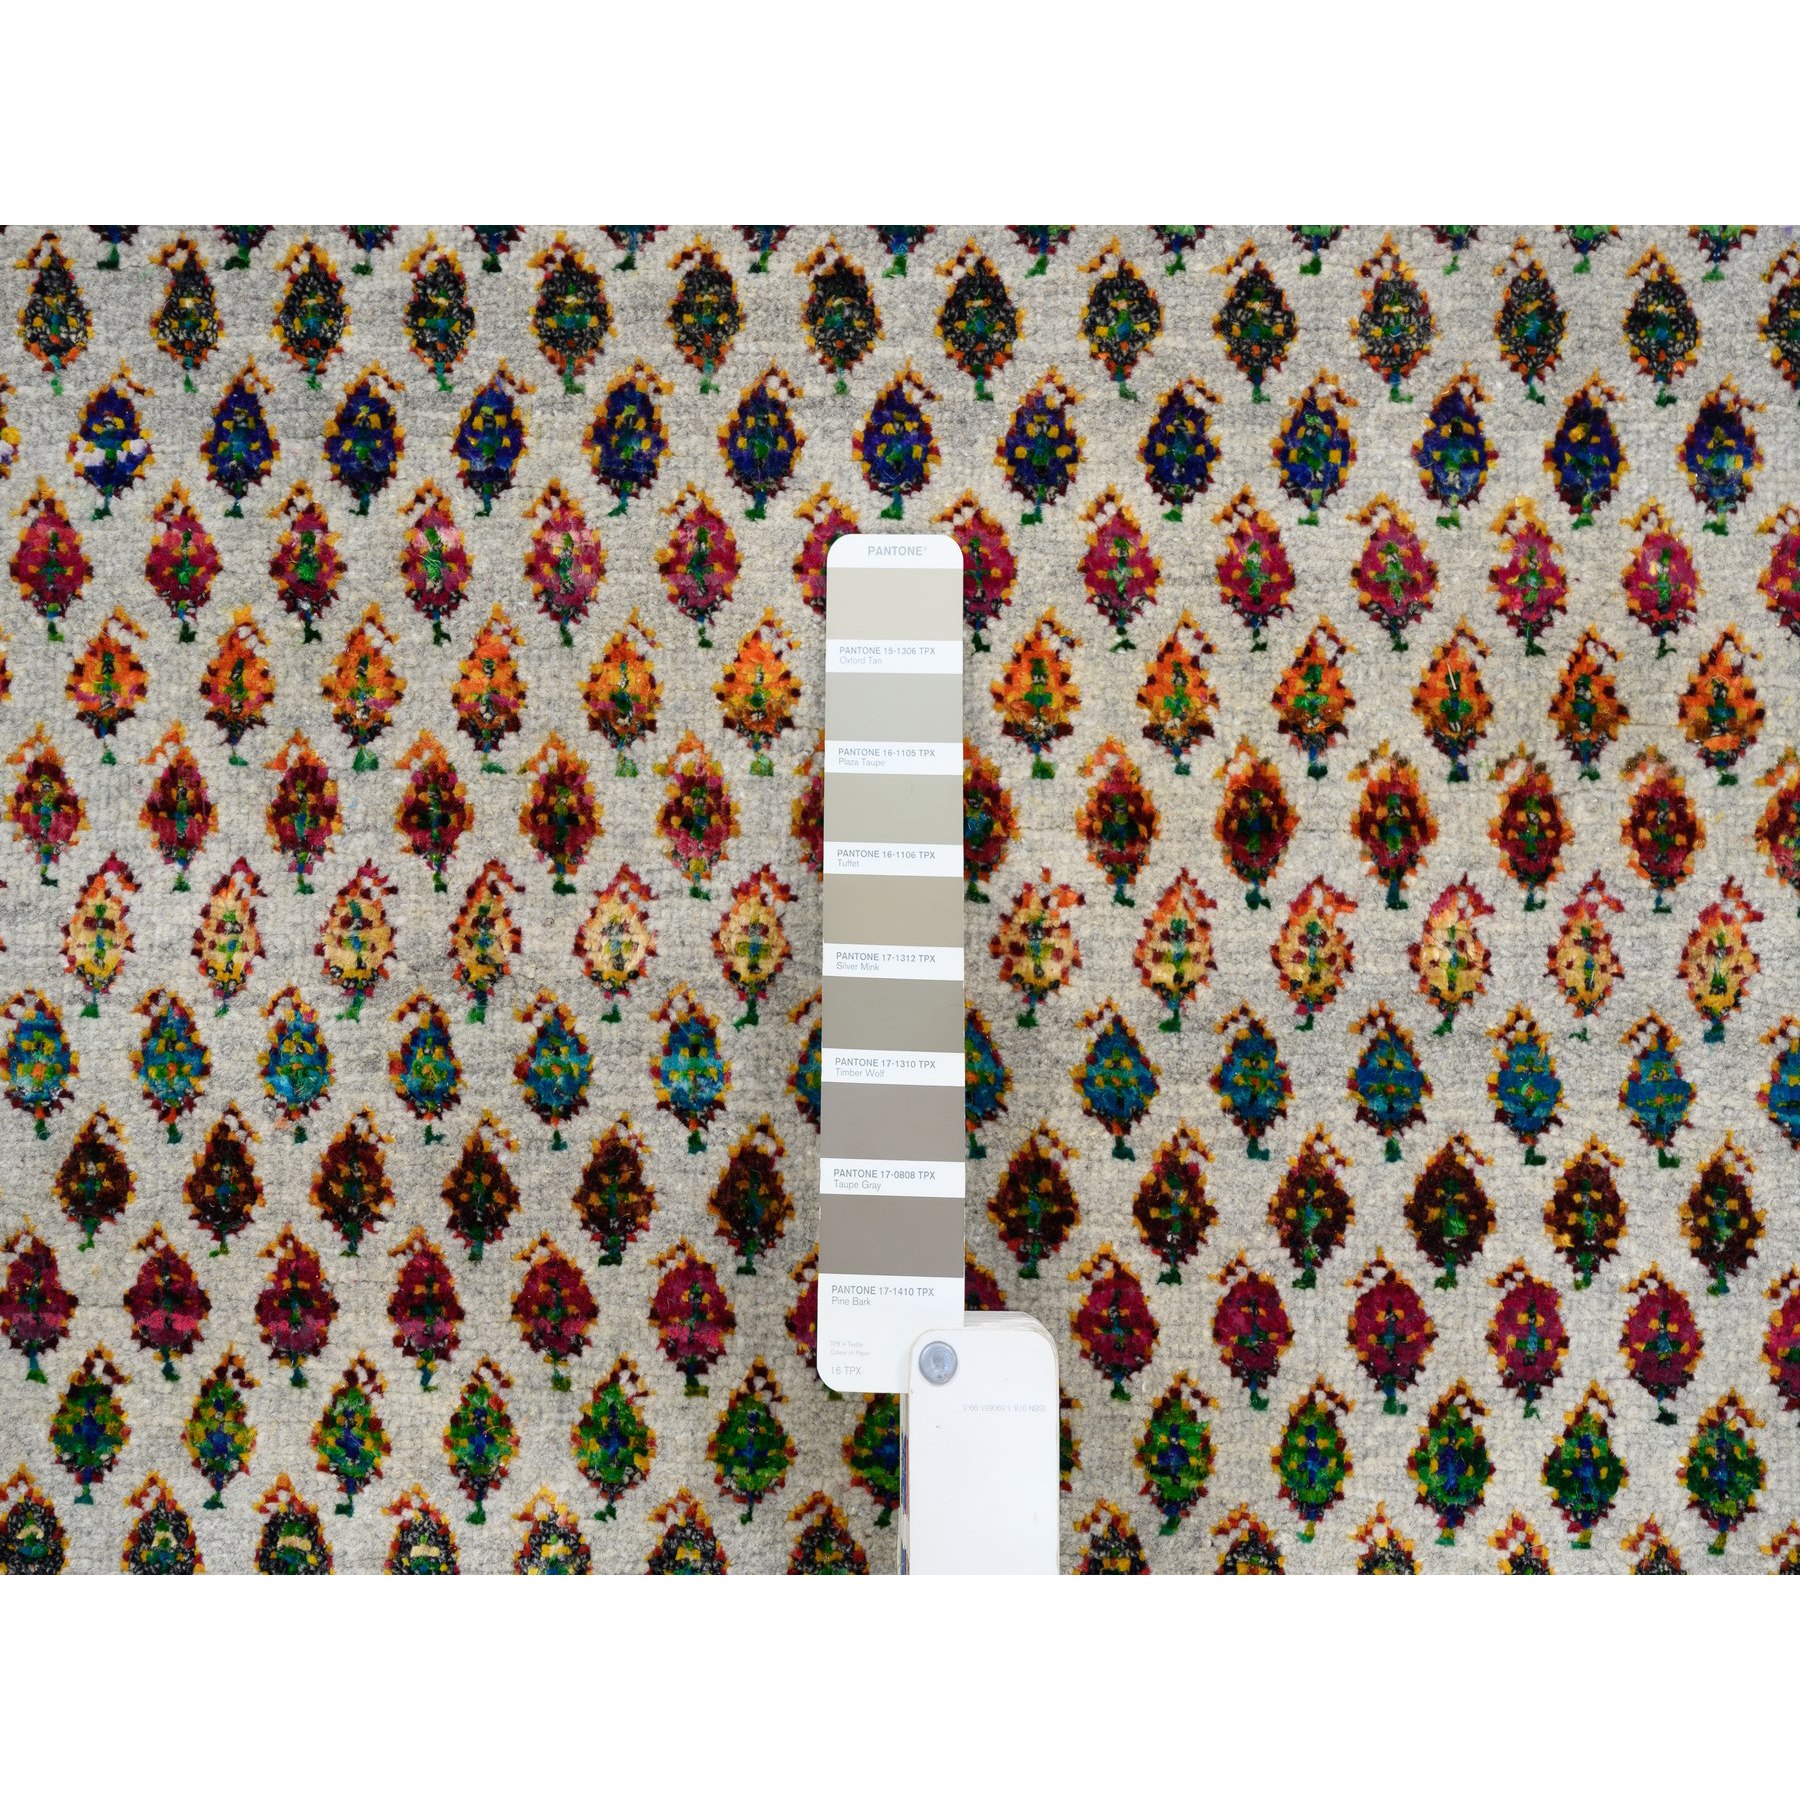 8'8"x12'2" Hand Woven Beige Sarouk Mir Inspired With Repetitive Boteh Design Colorful Wool And Sari Silk Oriental Rug 